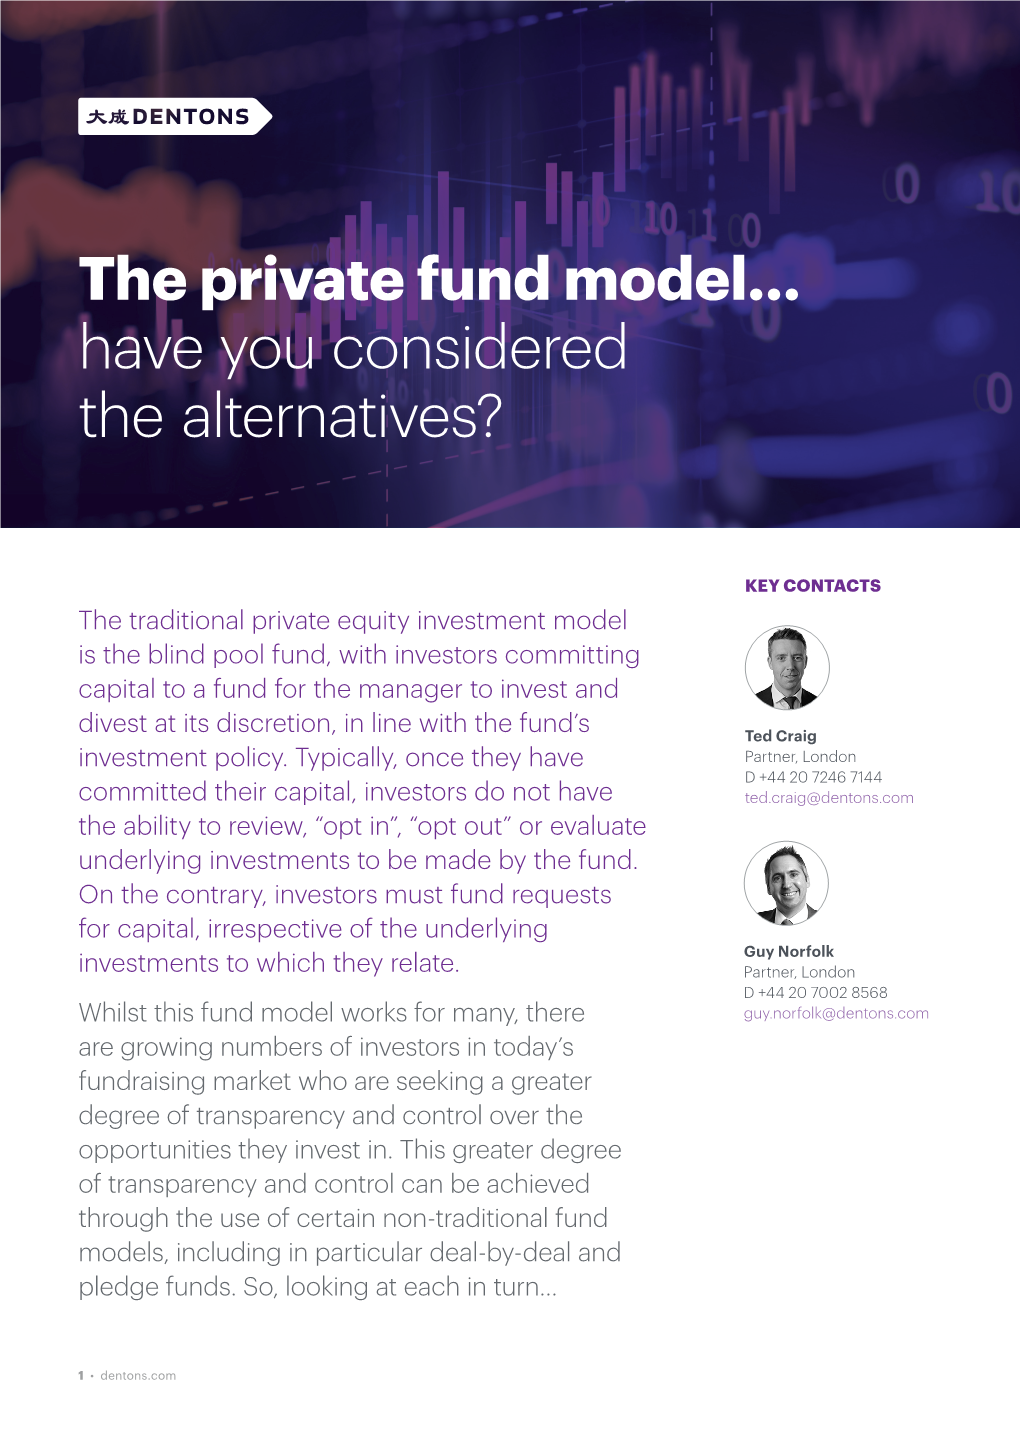 The Private Fund Model… Have You Considered the Alternatives?